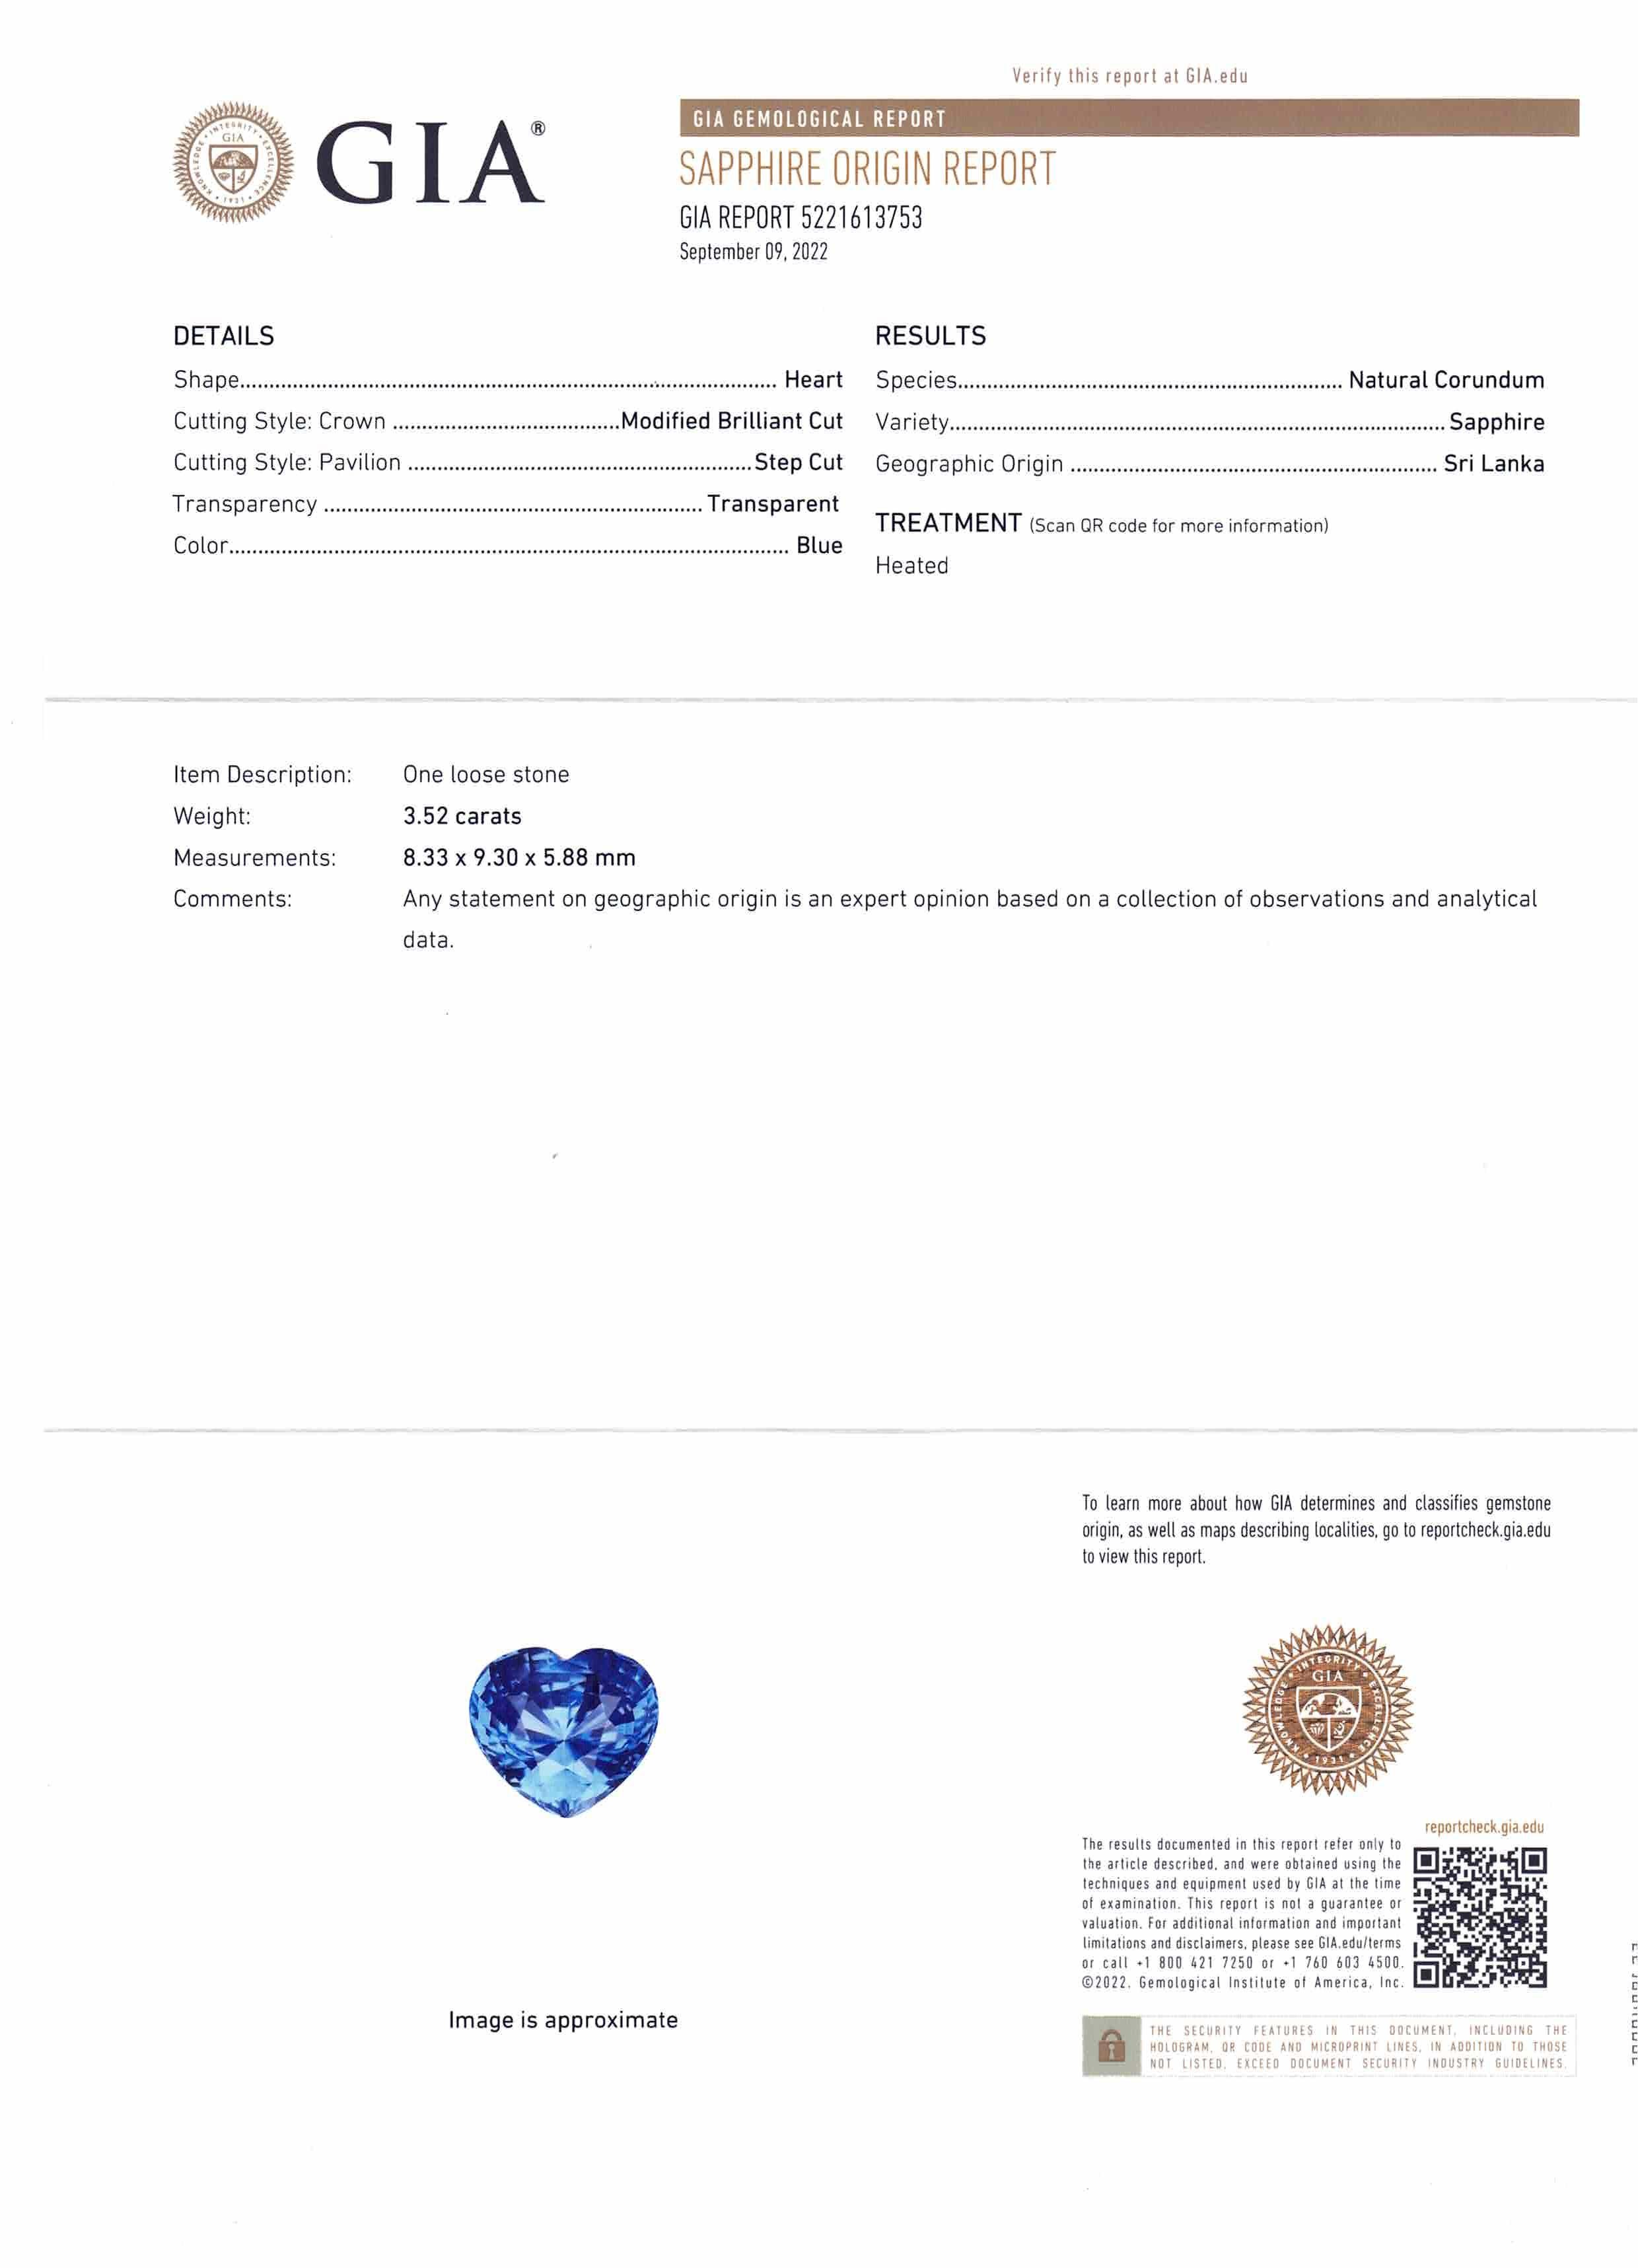 This is a stunning GIA Certified Sapphire

 

The GIA report reads as follows:

GIA Report Number: 5221613753
Shape: Heart
Cutting Style:
Cutting Style: Crown: Modified Brilliant Cut
Cutting Style: Pavilion: Step Cut
Transparency: Transparent
Color: